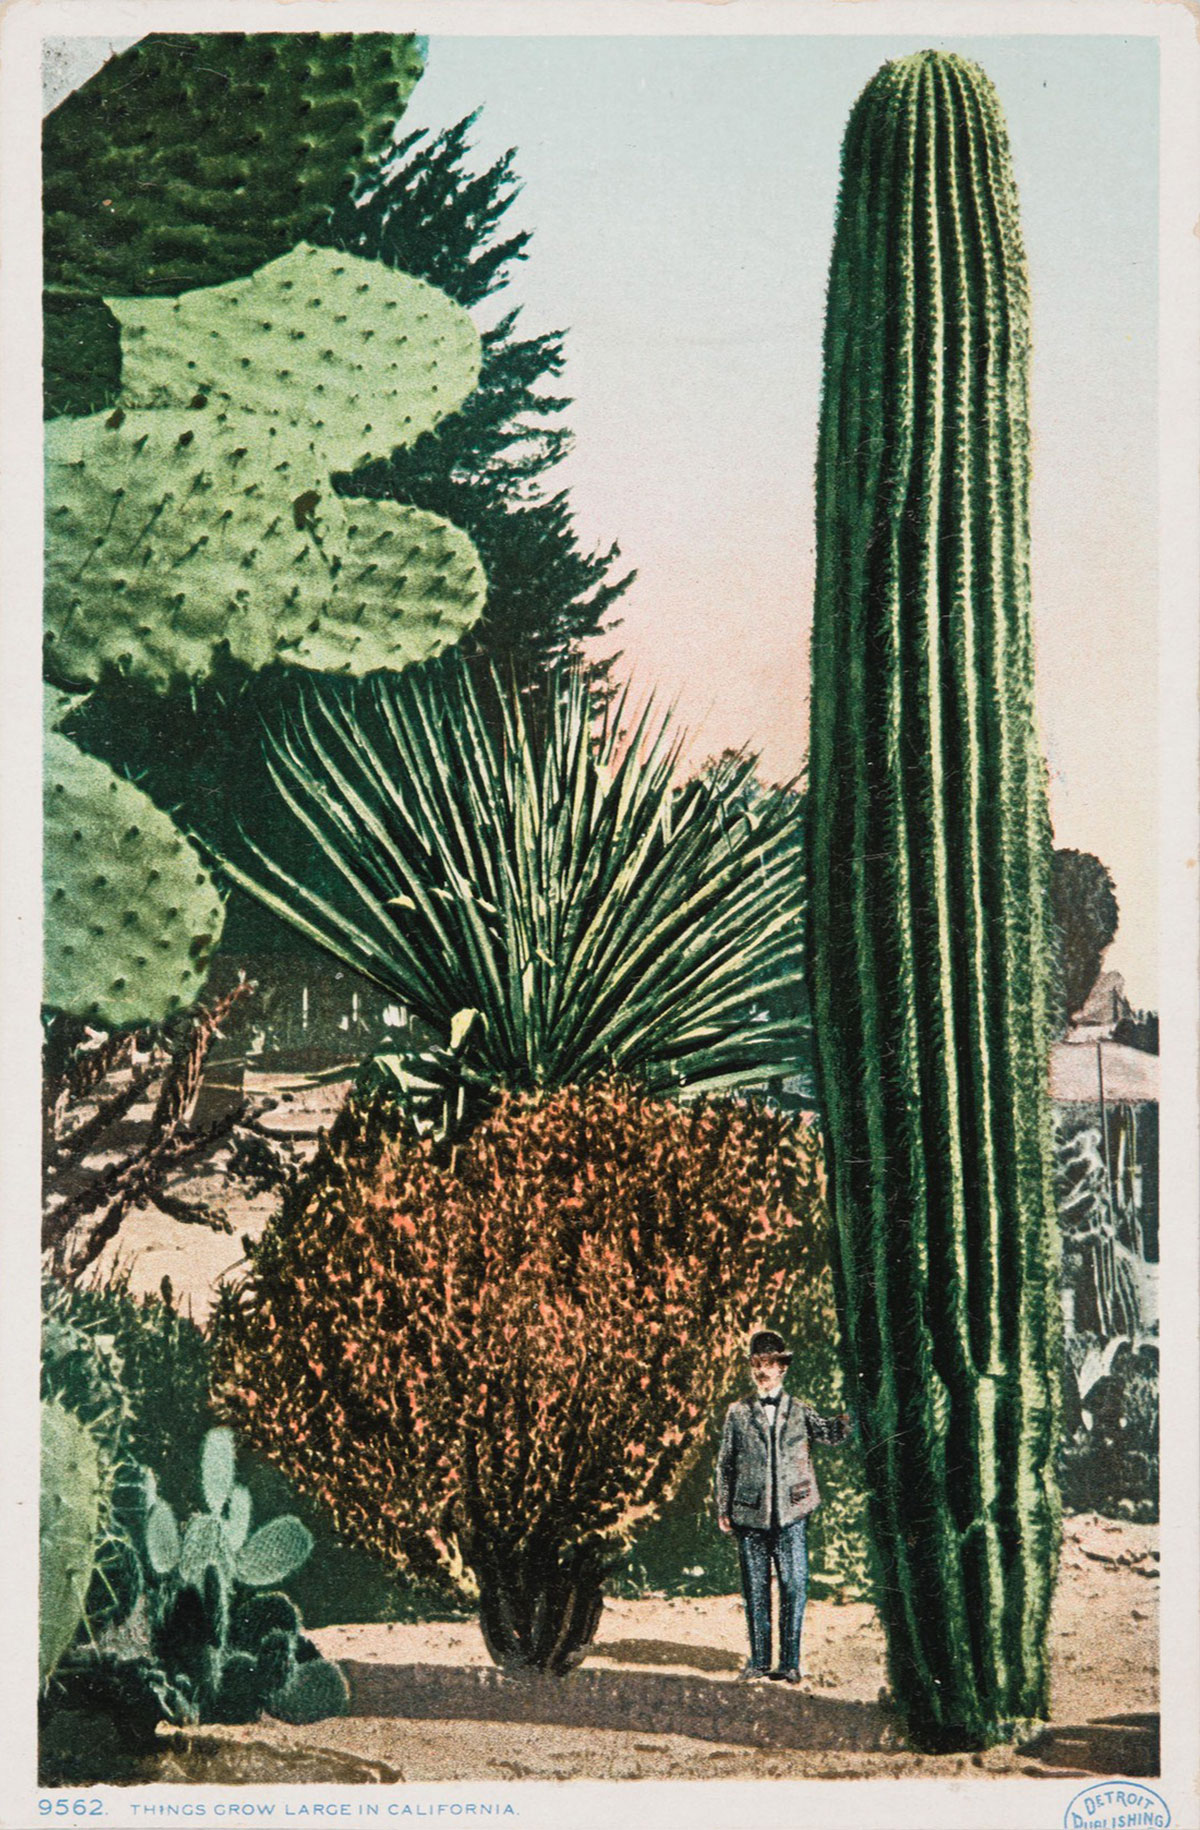 A man wearing a grey suit and bowler hat stands among enormous cacti and desert plants set against a pastel sky